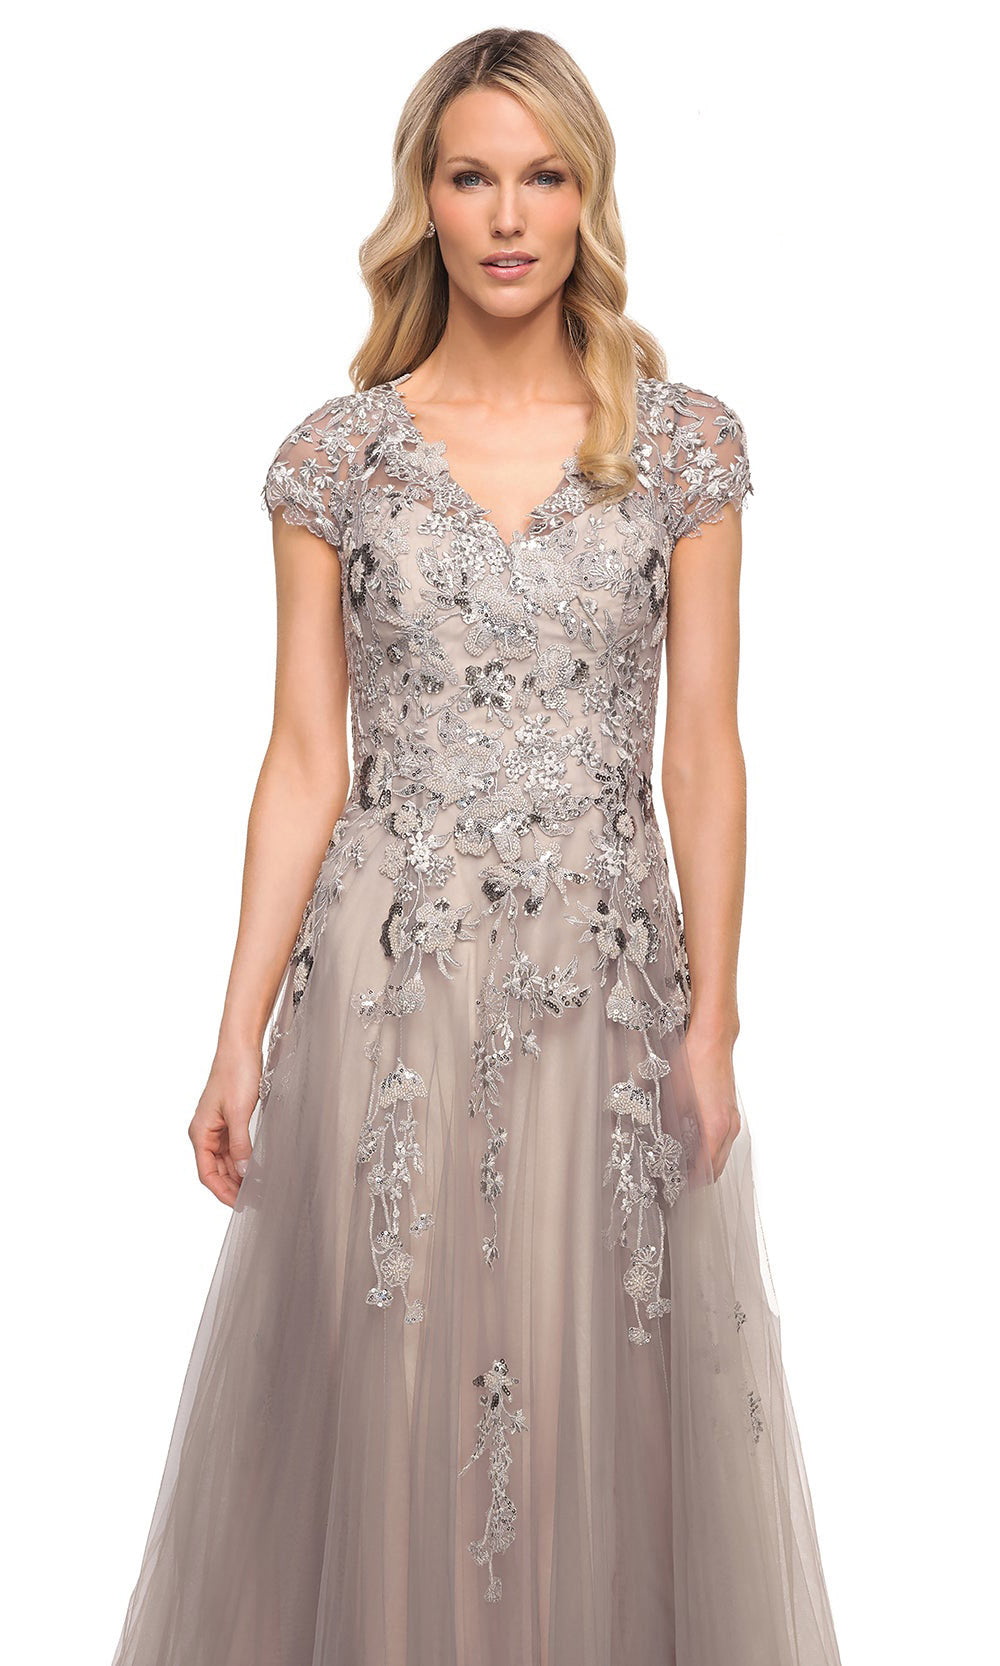 La Femme - 30239 Embellished Sheer Lace A-Line Dress In Silver and Pink